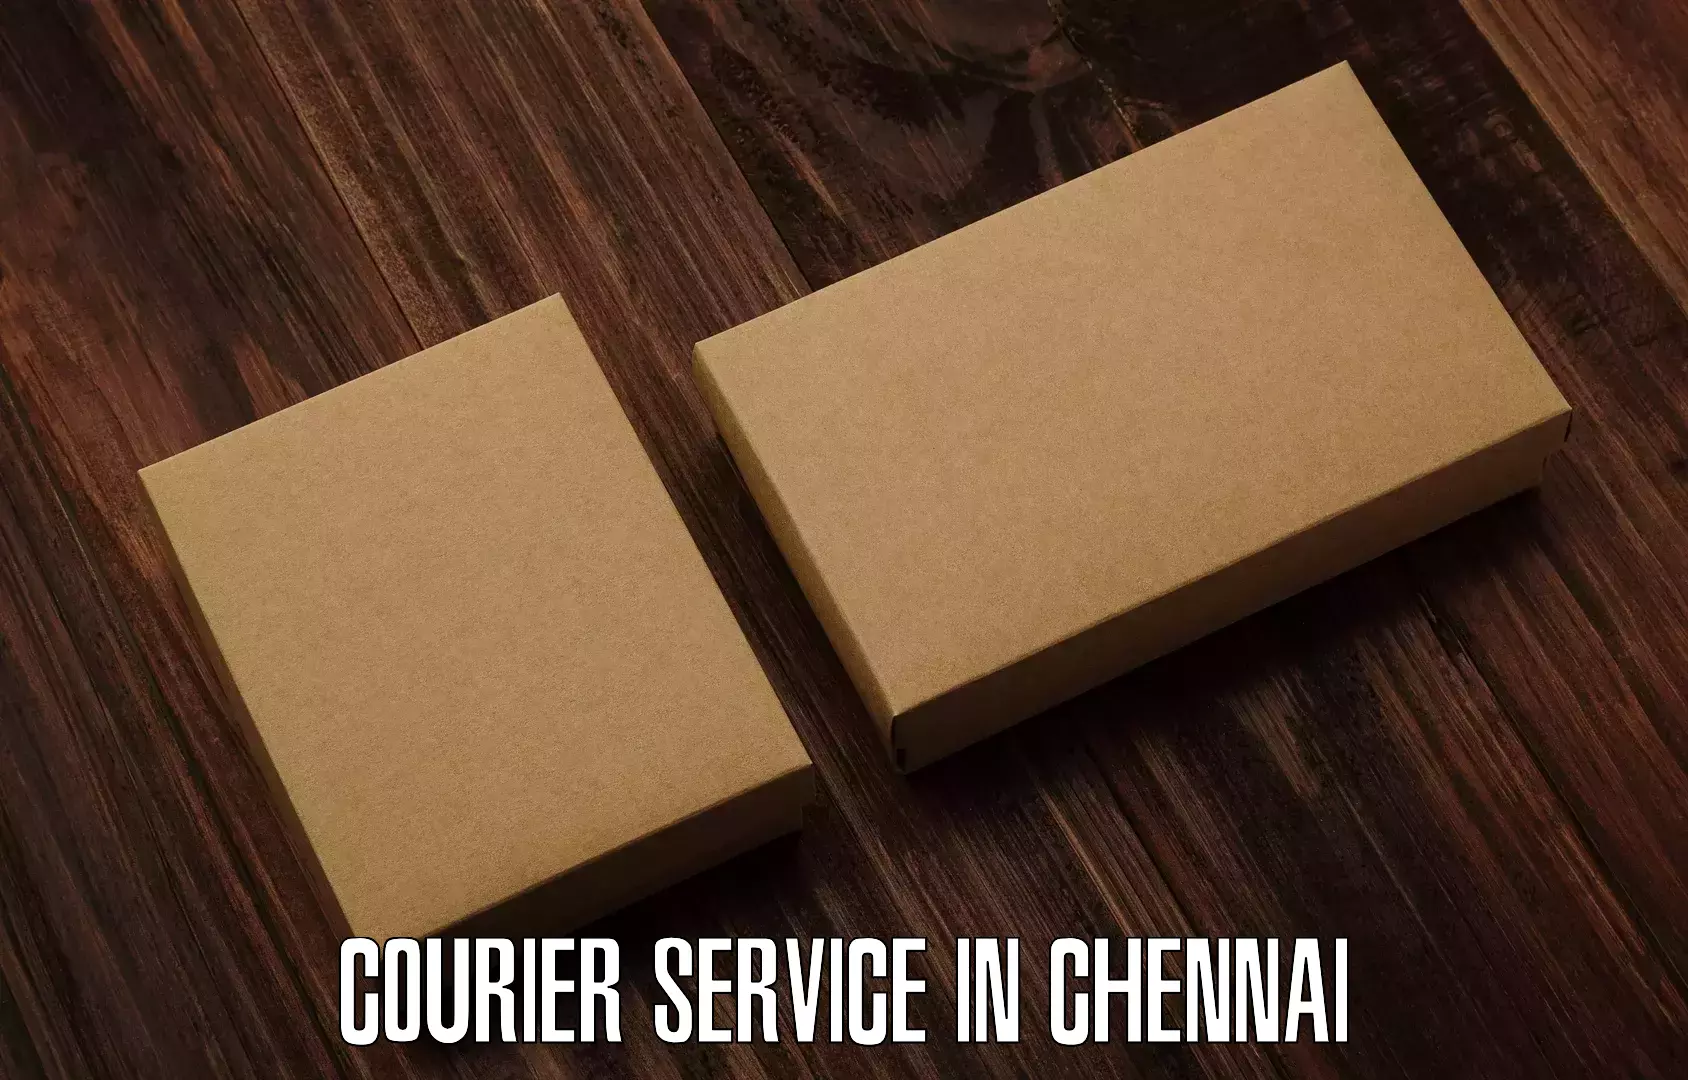 Expedited shipping methods in Chennai